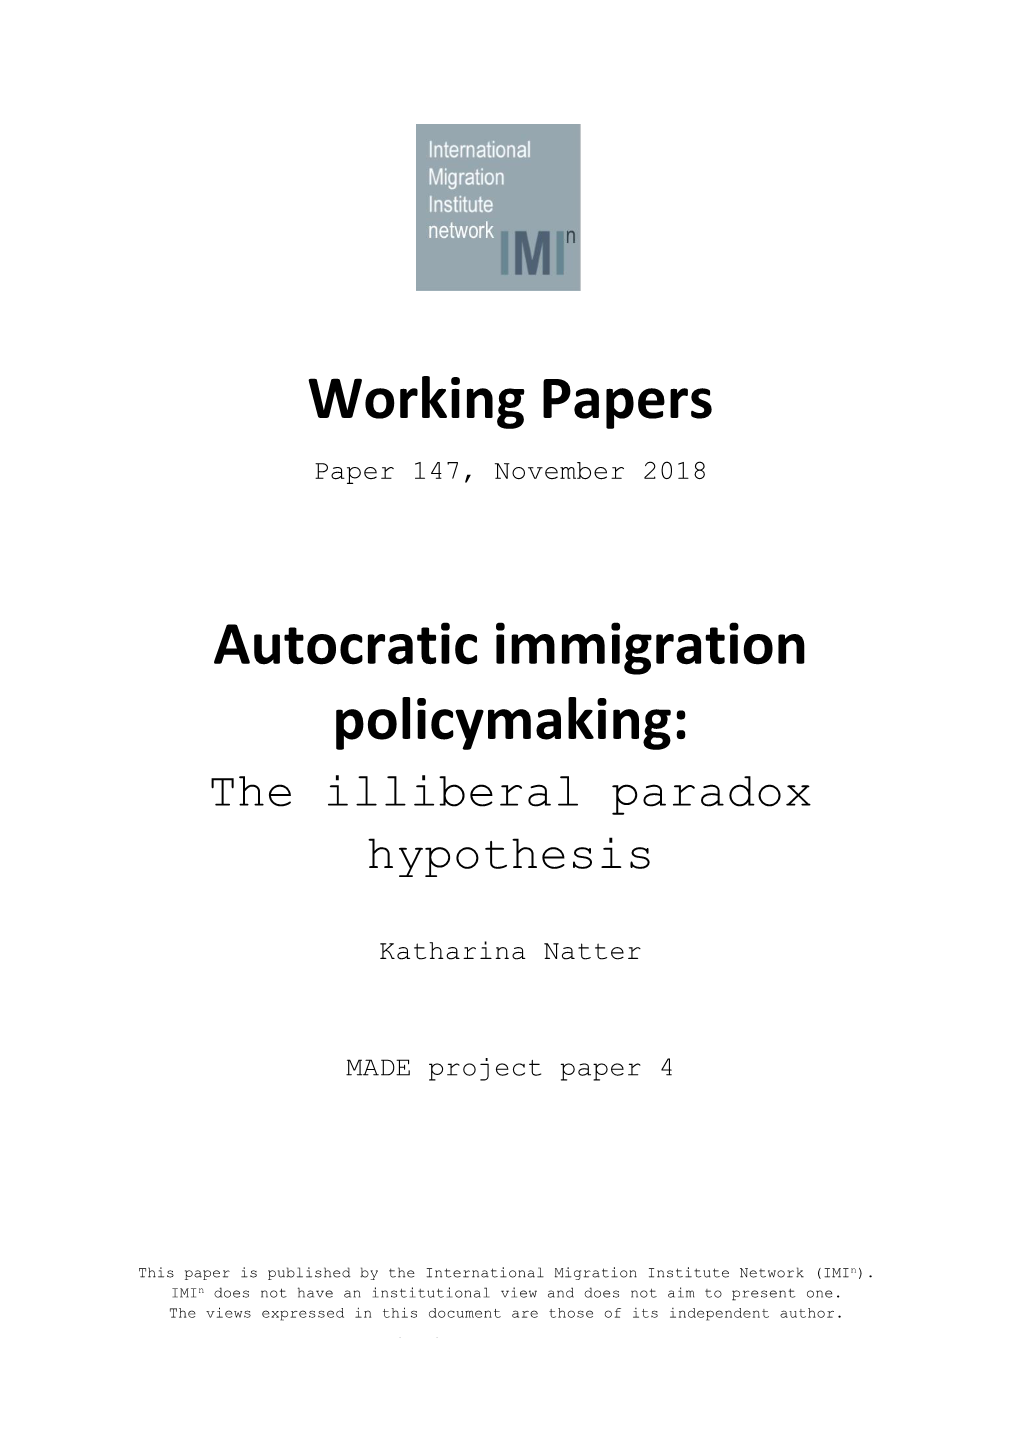 Working Papers Autocratic Immigration Policymaking